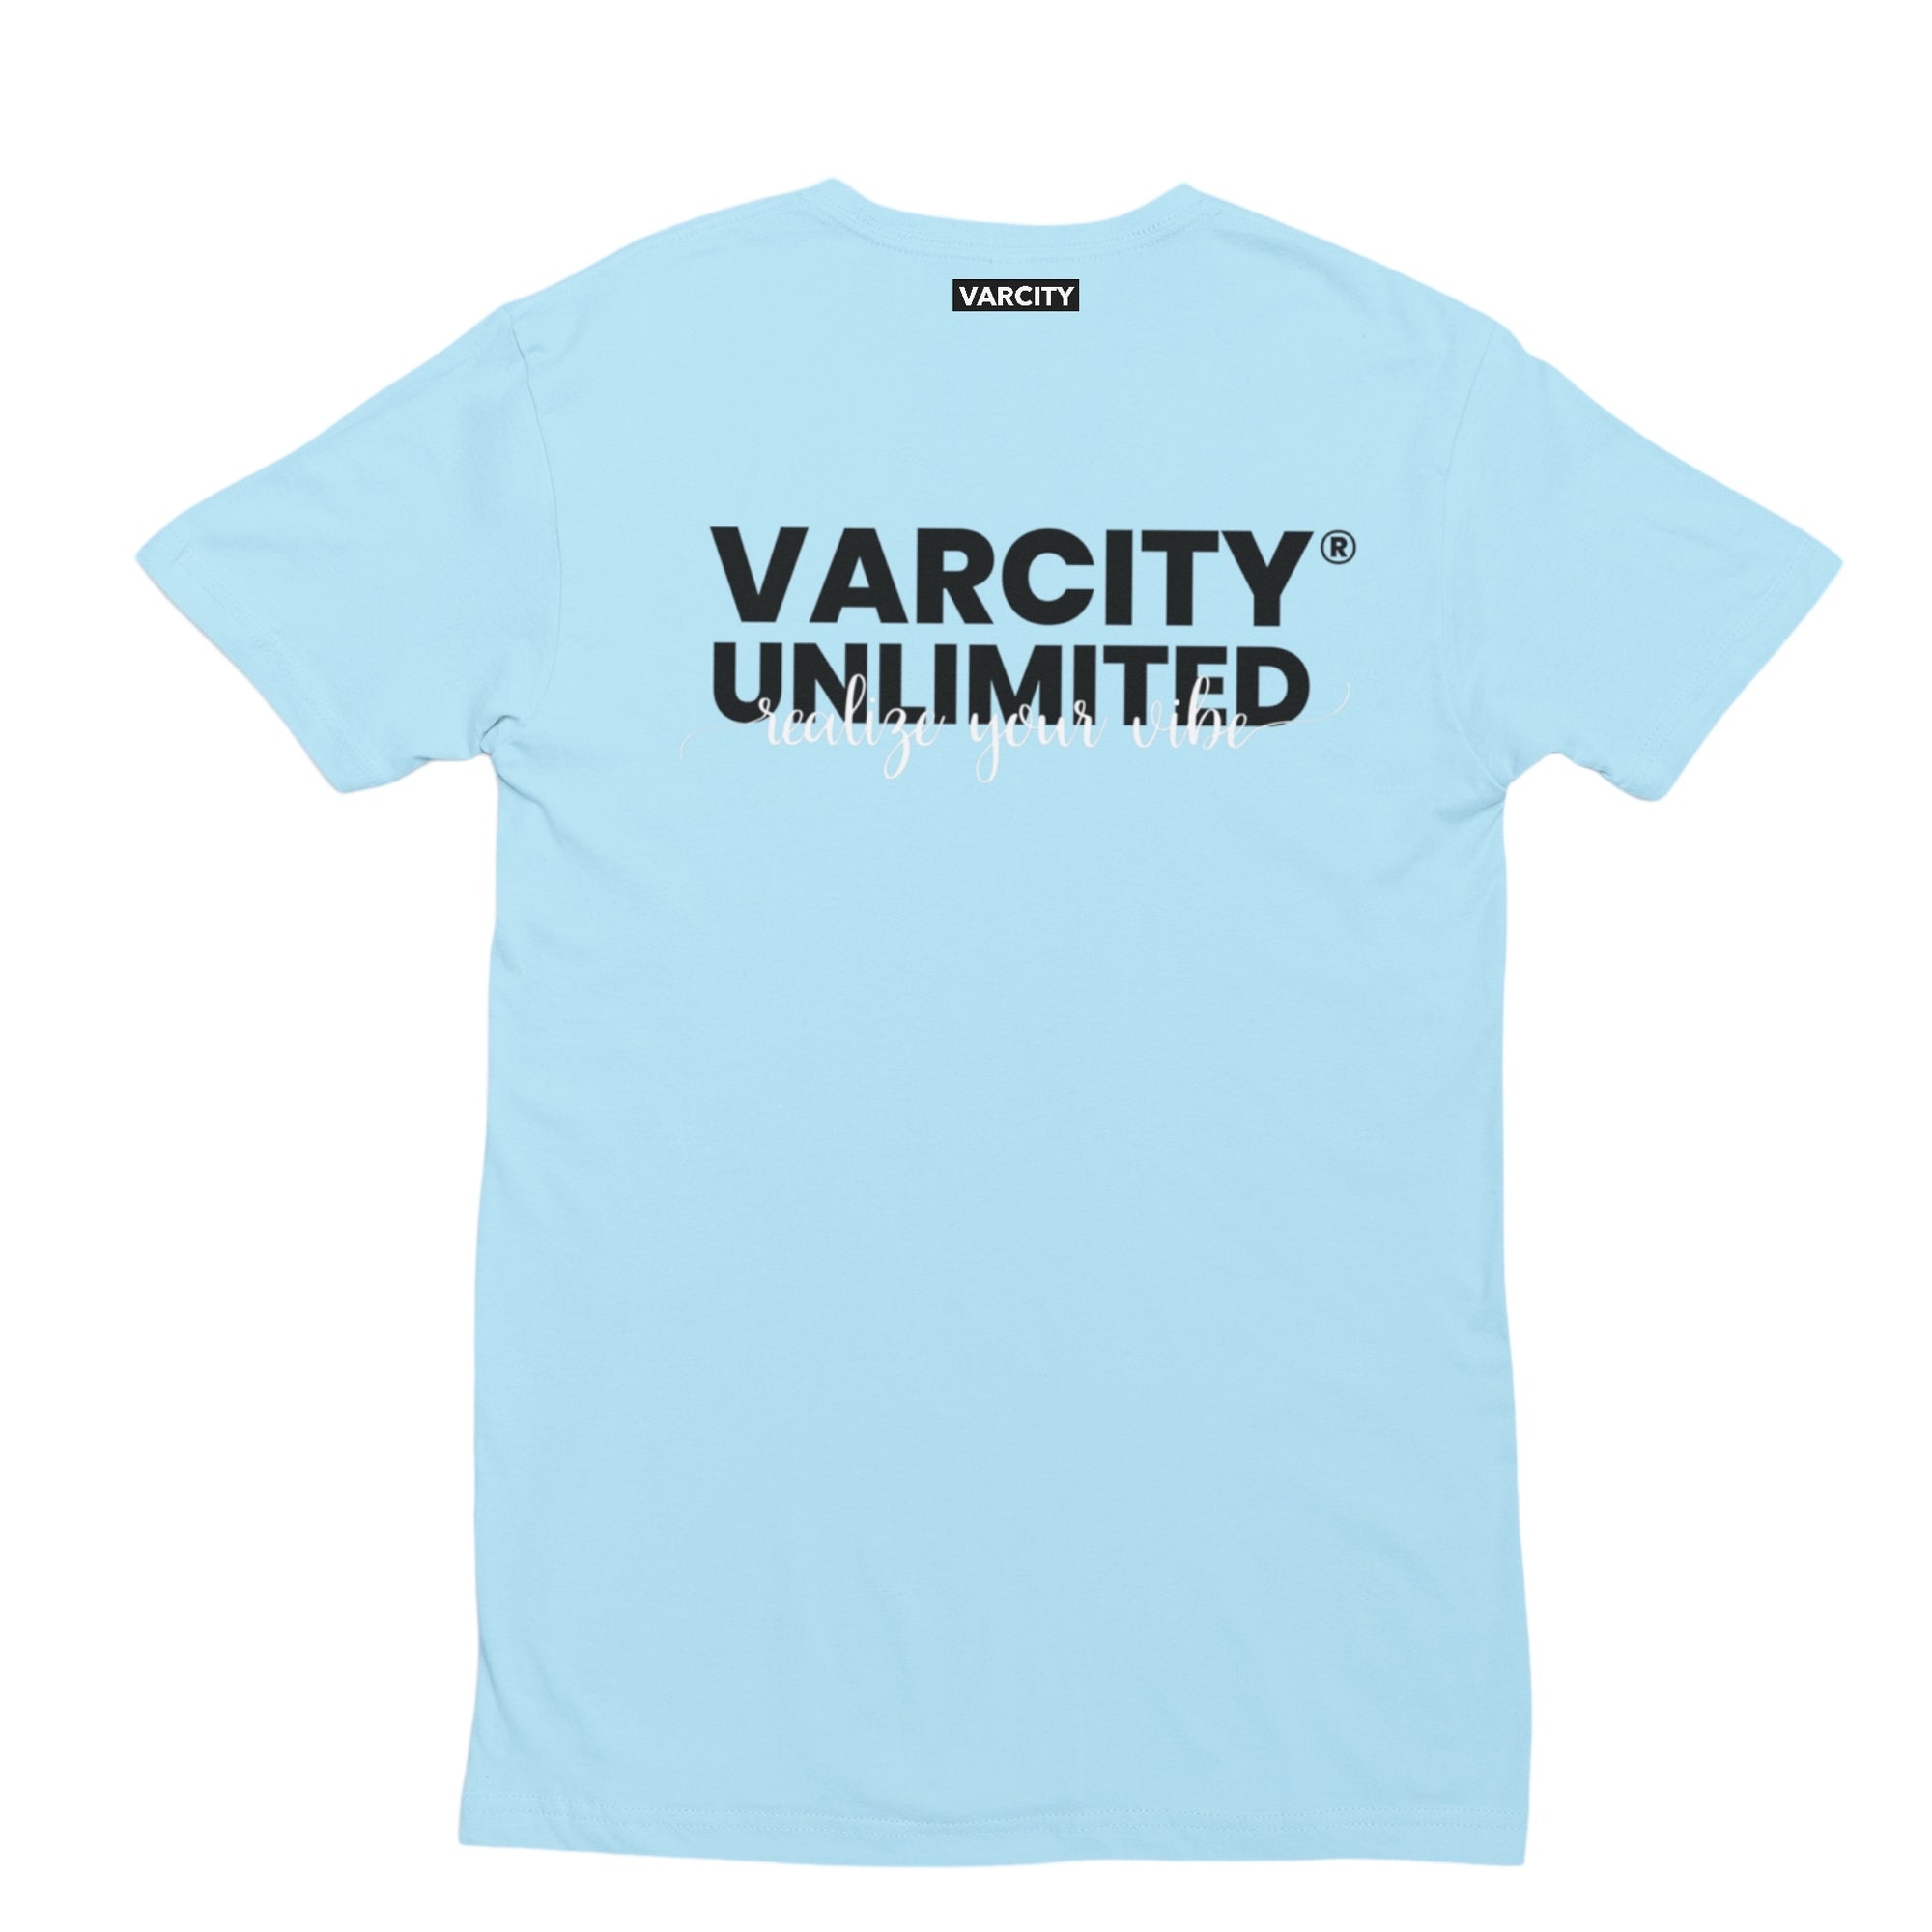 Varcity ® Unlimited Realize Your Vibe T Shirt Light Blue